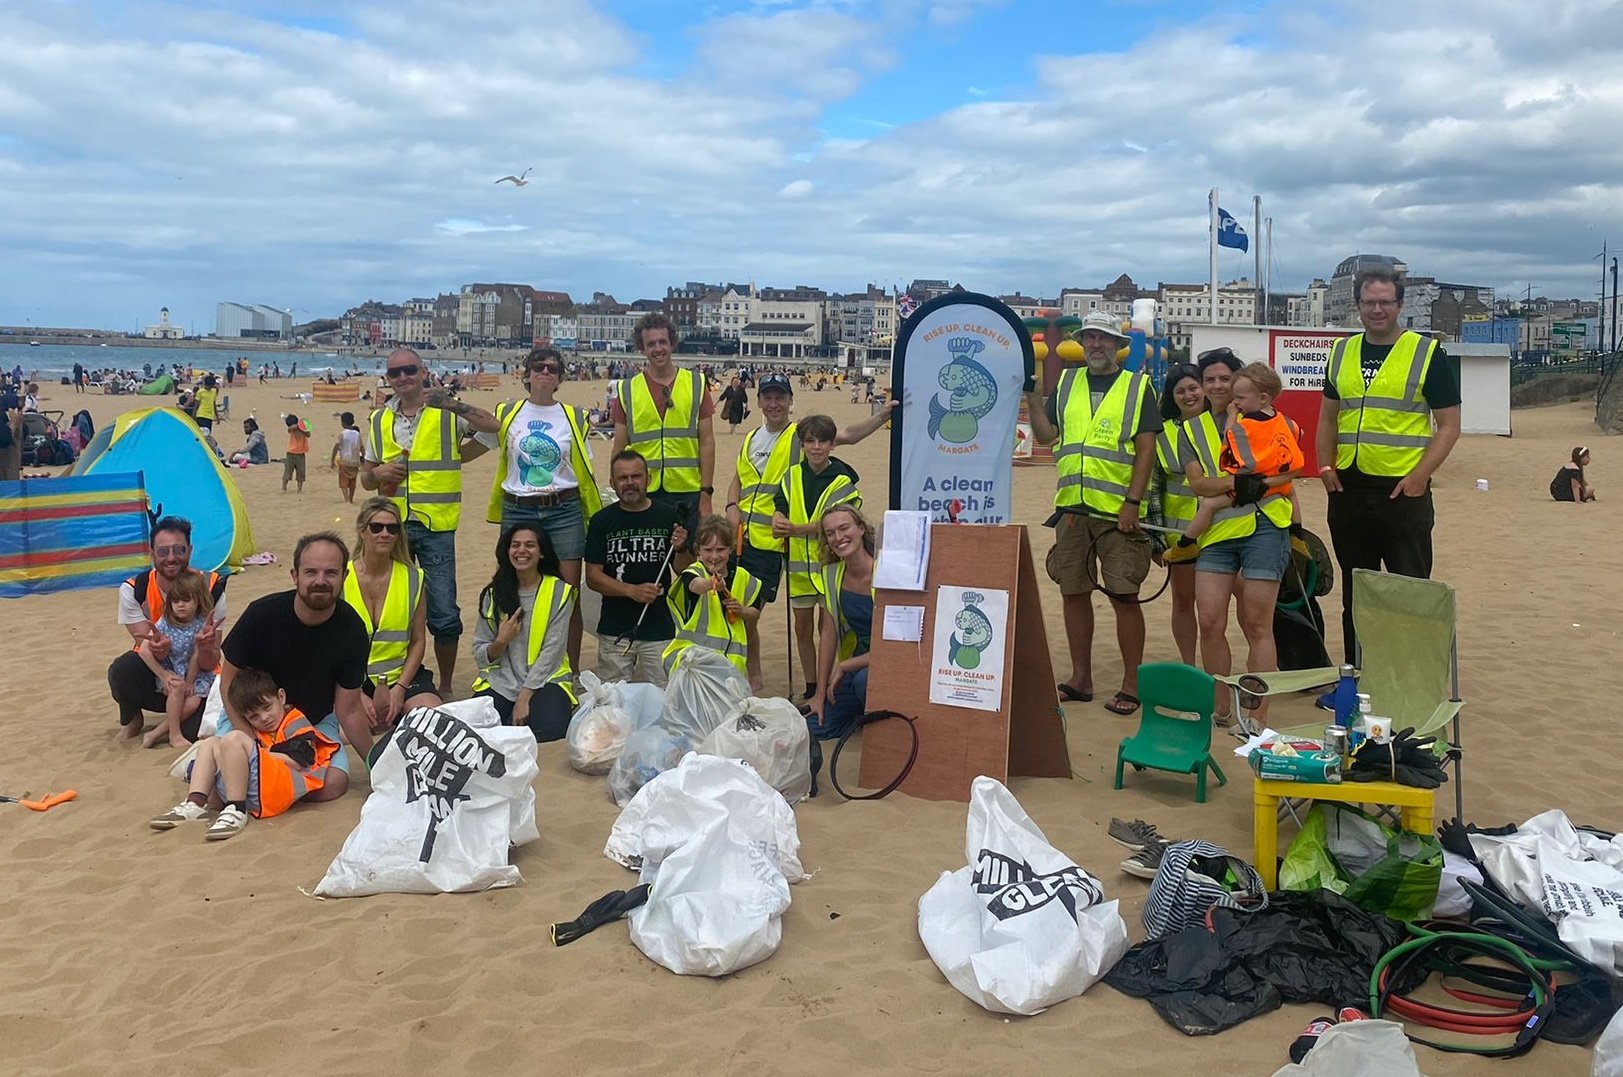 Plastic Free Thanet beach clean with Rise Up Clean Up